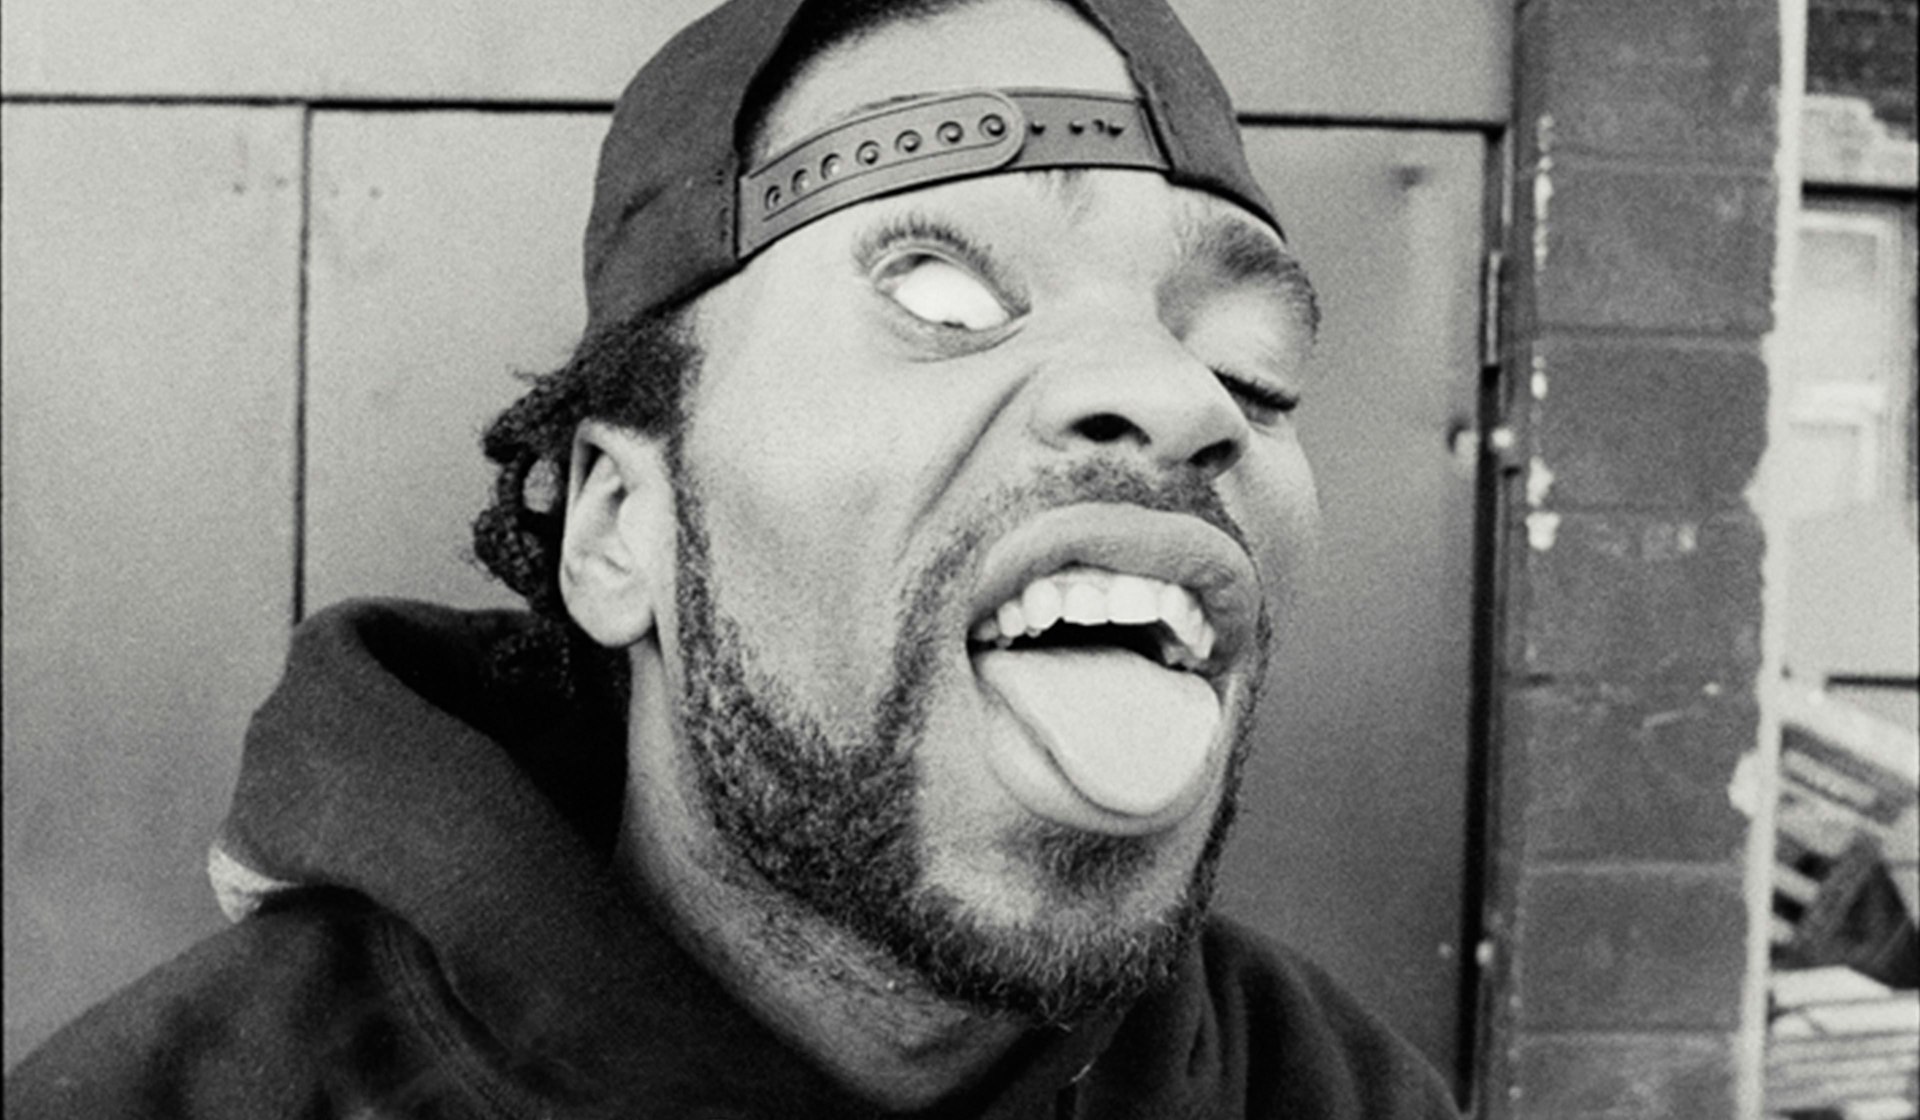 In Pictures: Rare portraits from Wu-Tang Clan’s golden era